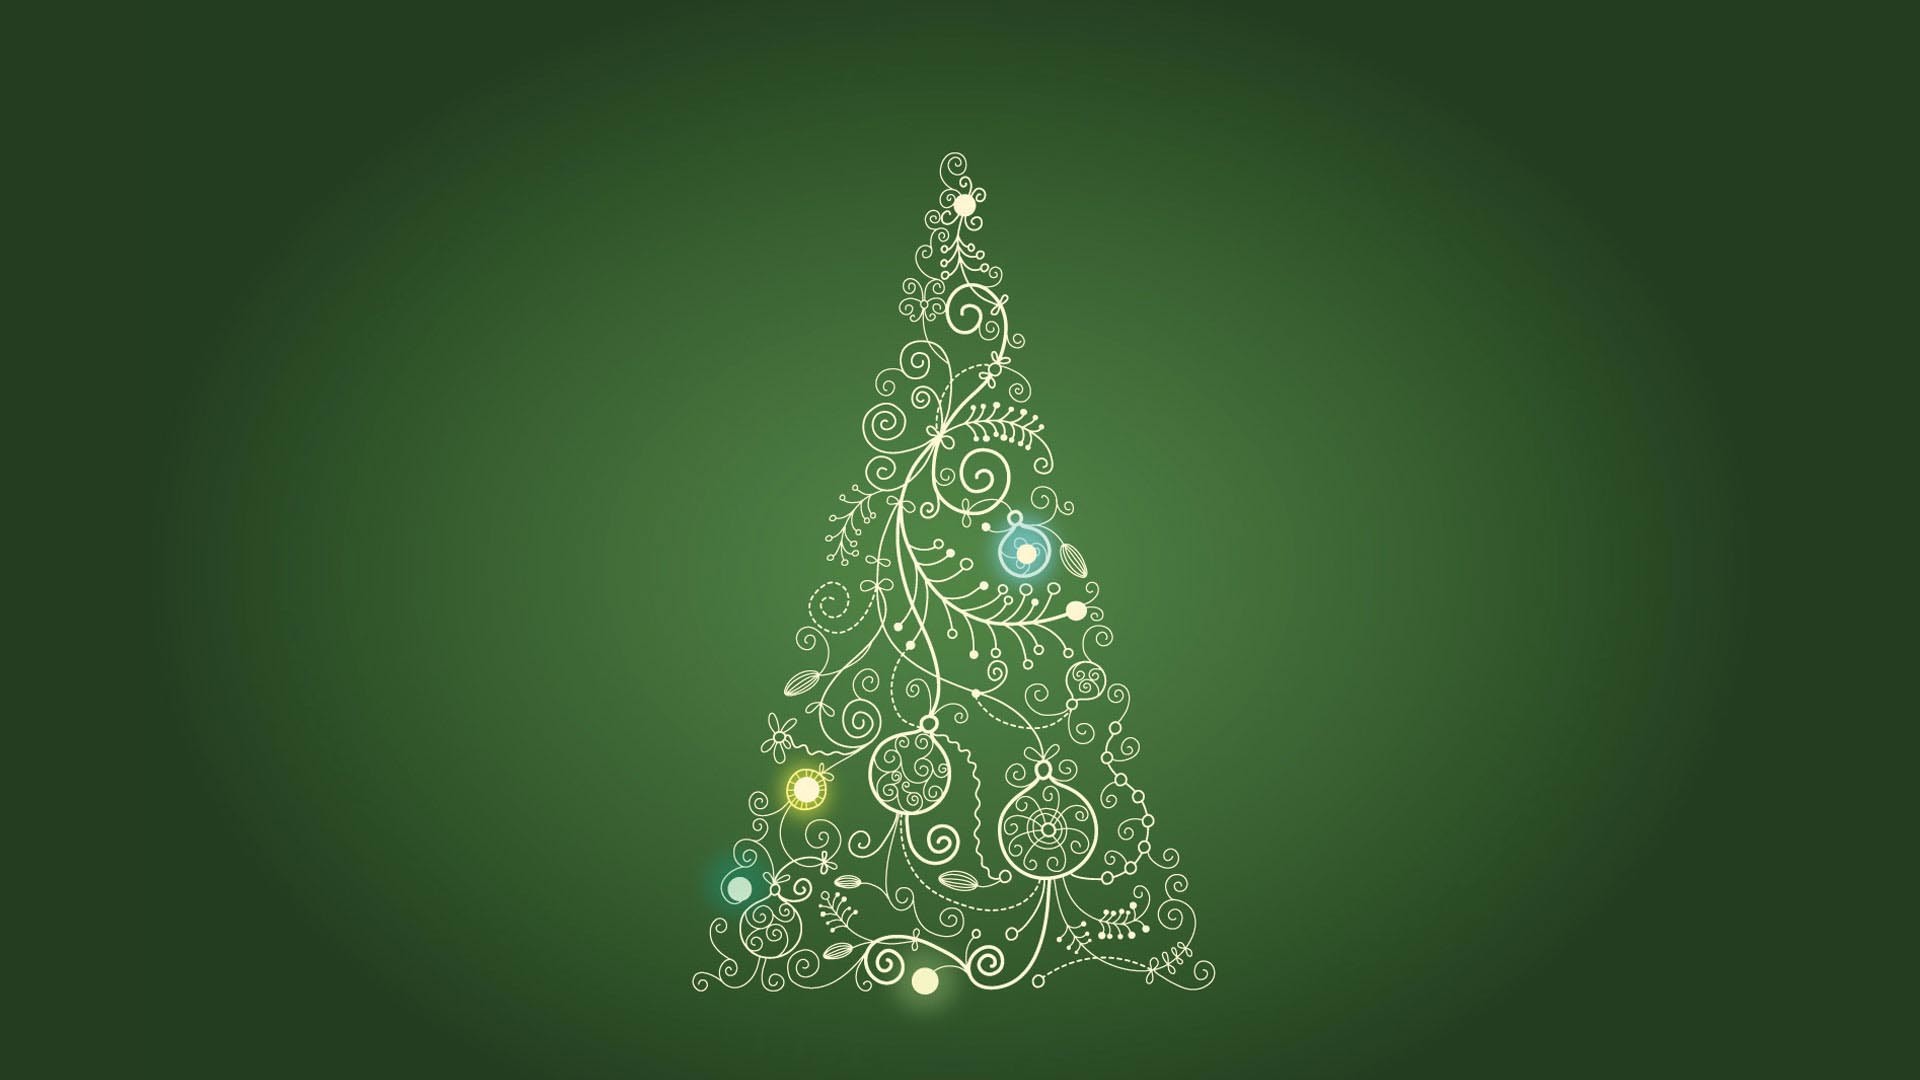 1920x1080 Images About Christmas Wishes Wallpapers On Pinterest Tree Background Green  And Merry